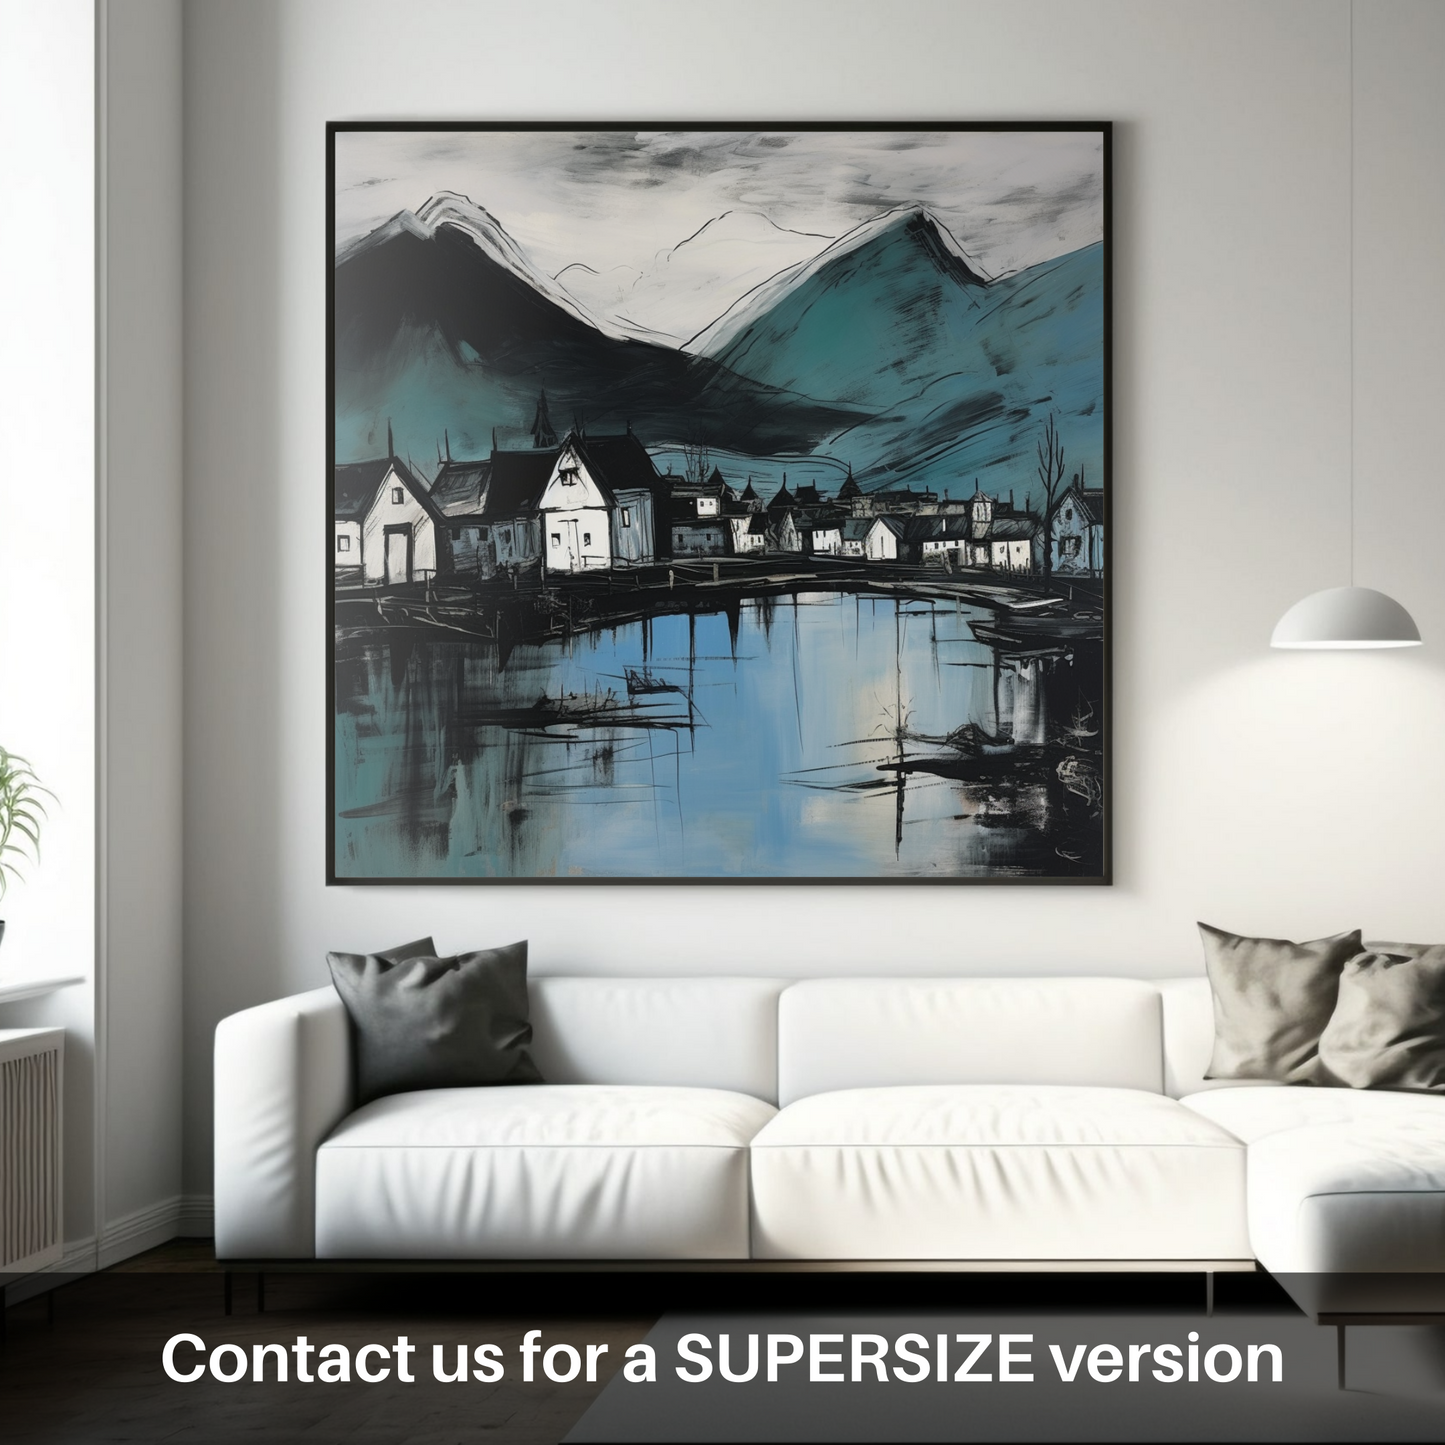 Painting and Art Print of Fort William, Highlands. Highland Serenity: An Illustrative Expression of Fort William.